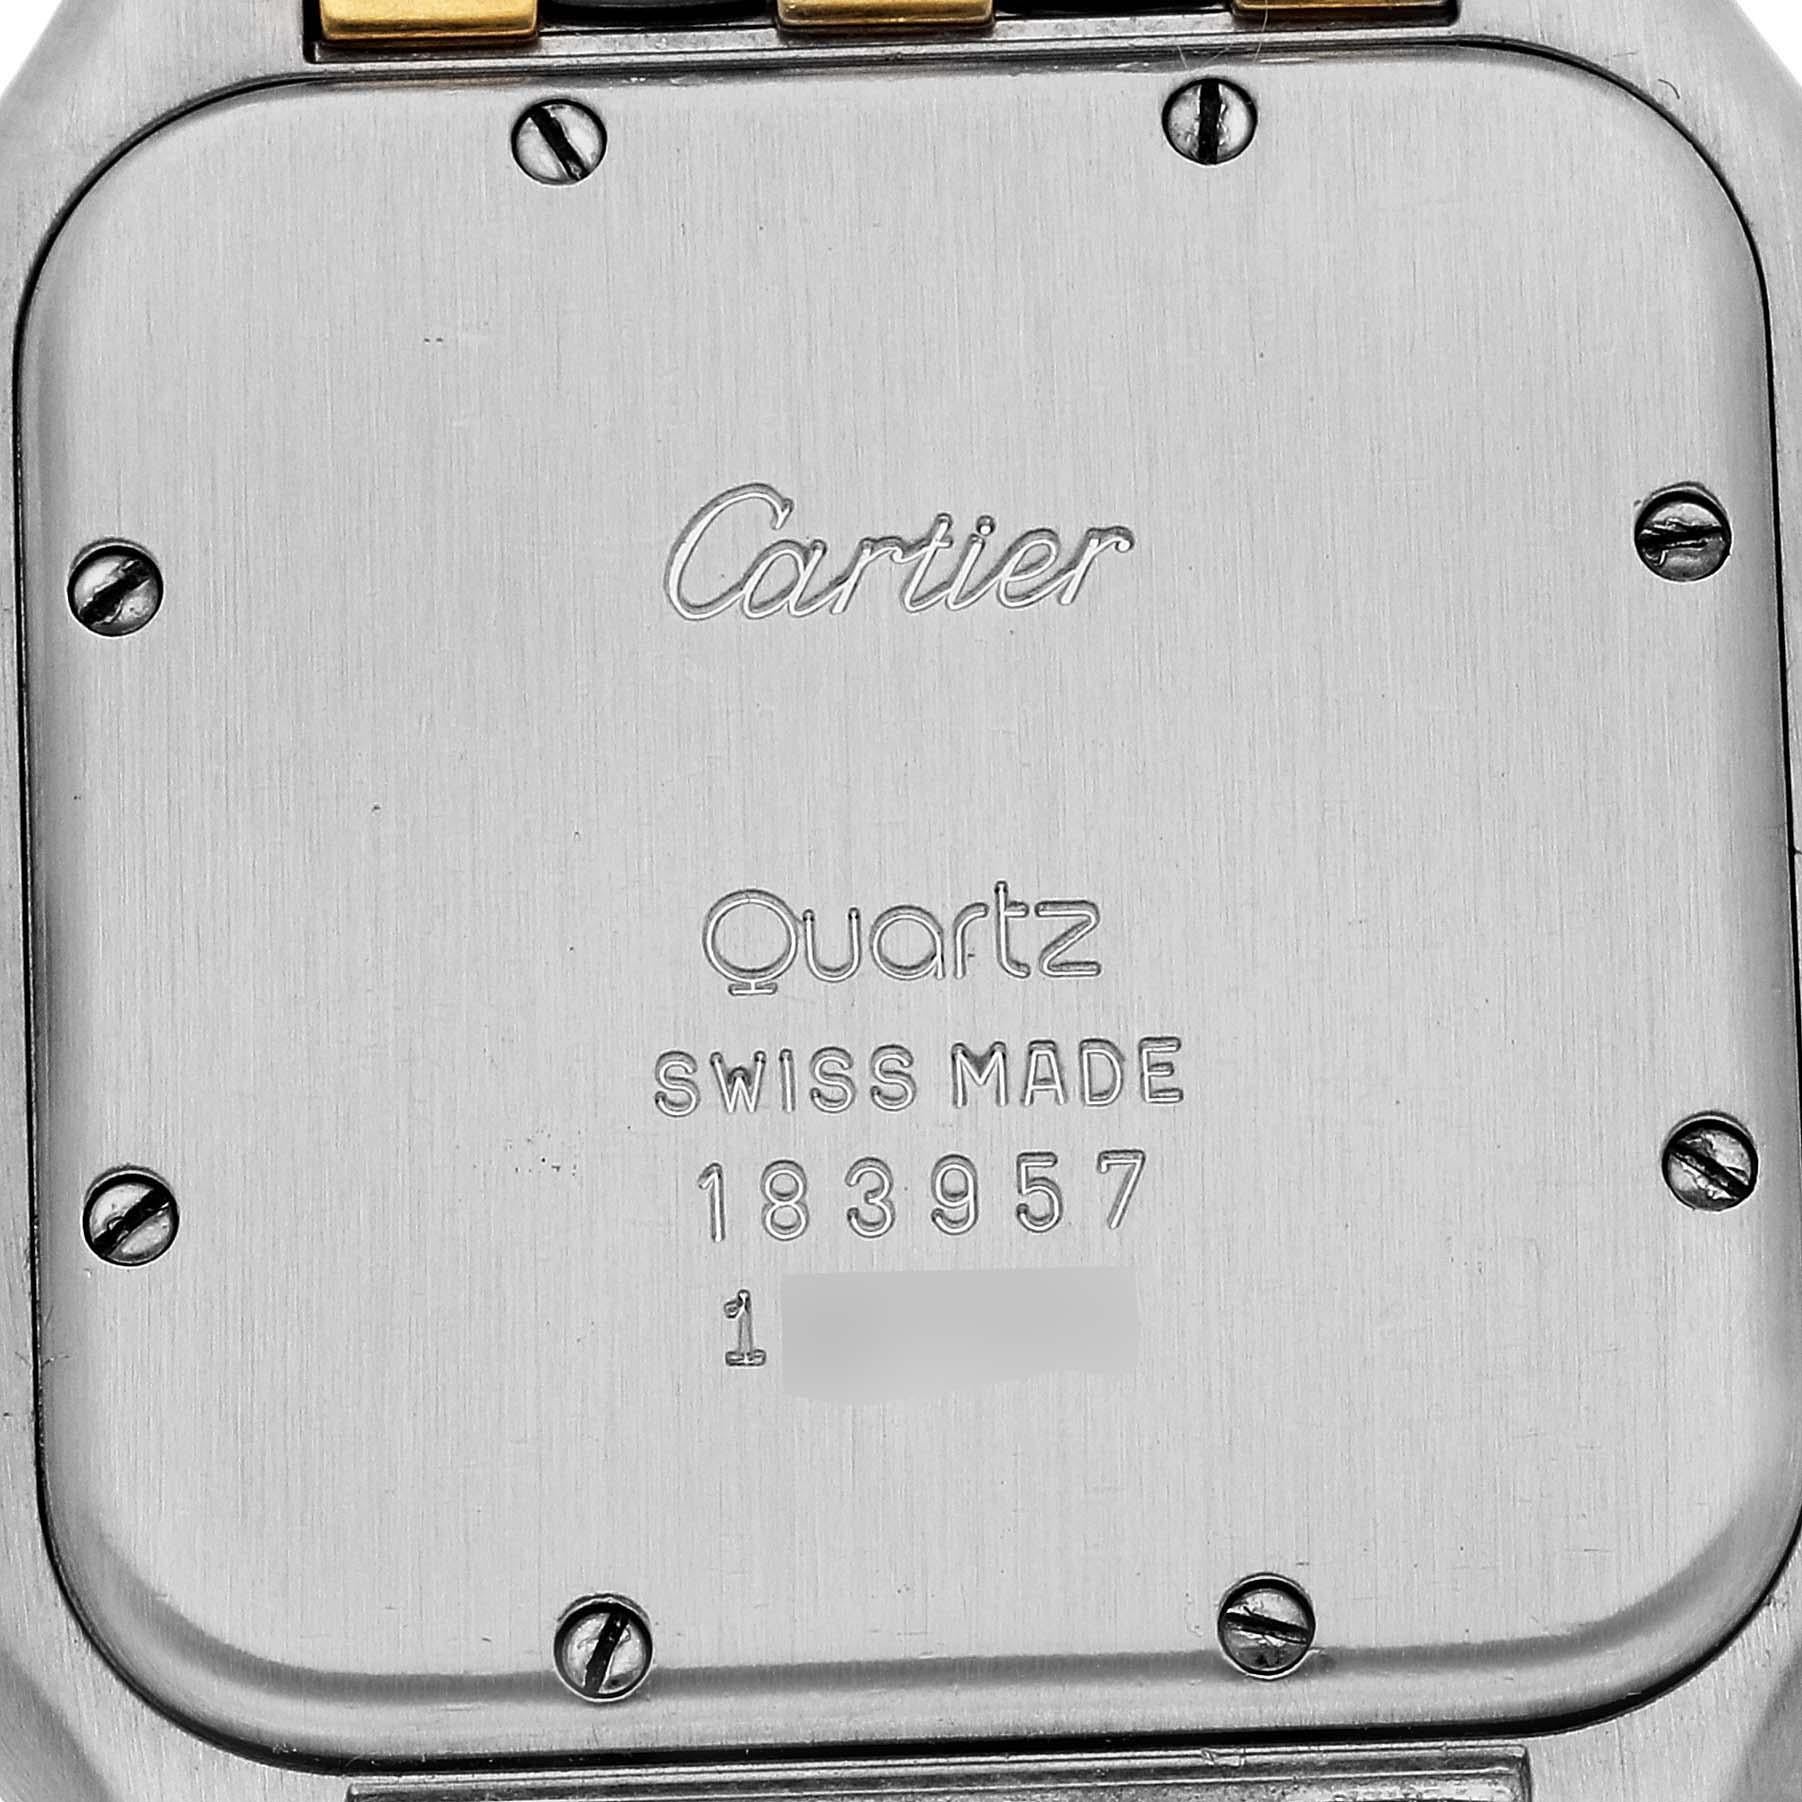 Cartier Panthere Large Steel Yellow Gold Three Row Quartz Mens Watch 183957. Quartz movement. Stainless steel case 29.0 x 29.0 mm. Octagonal crown set with a blue spinel cabochon. 18k yellow gold bezel, secured with 8 pins. Scratch resistant